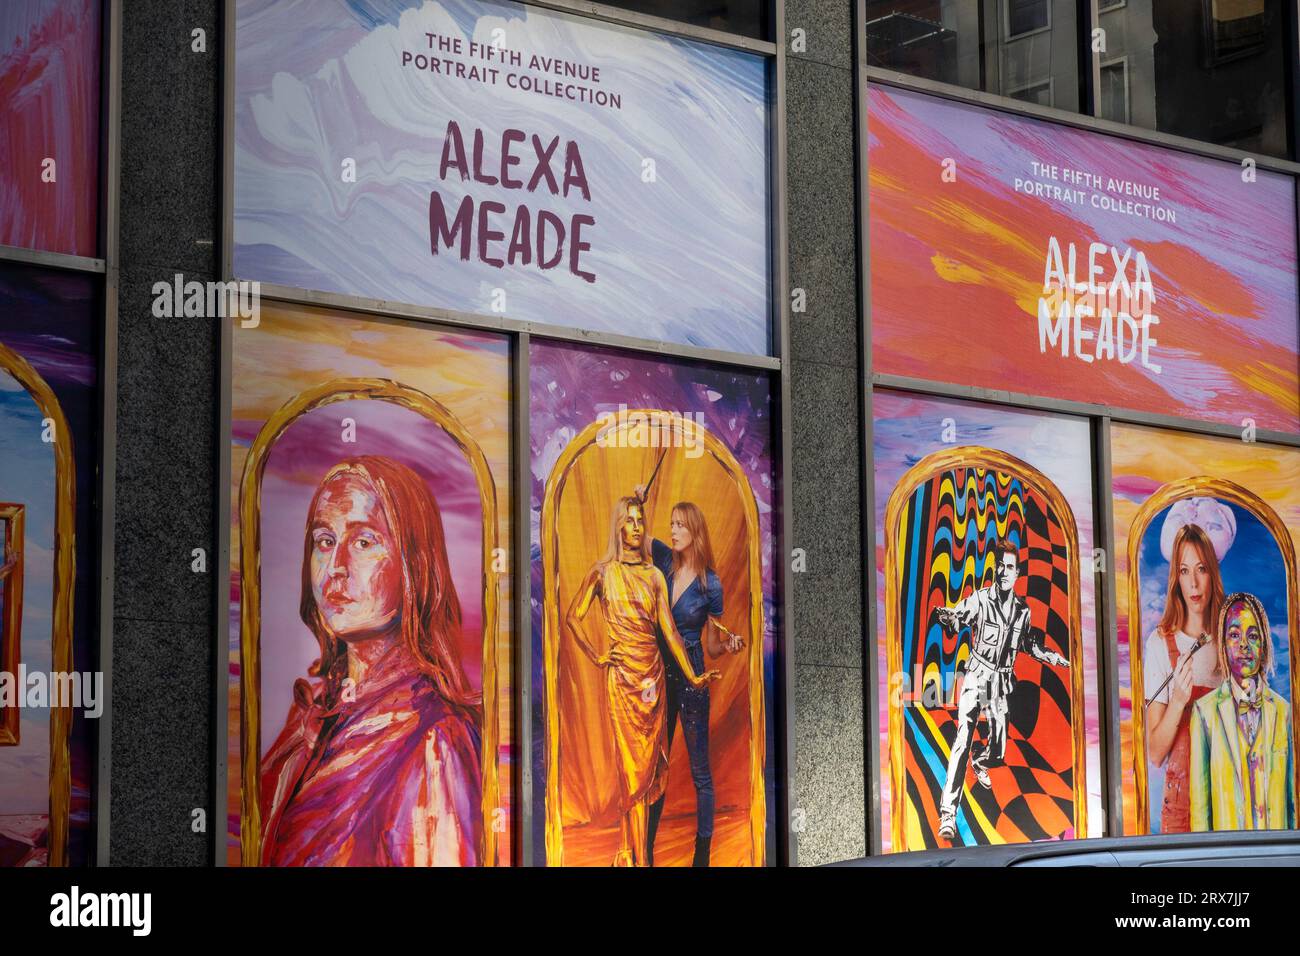 The Fifth Avenue Portrait Collection by Alexa Meade is a public art display, New York City, USA  2023 Stock Photo